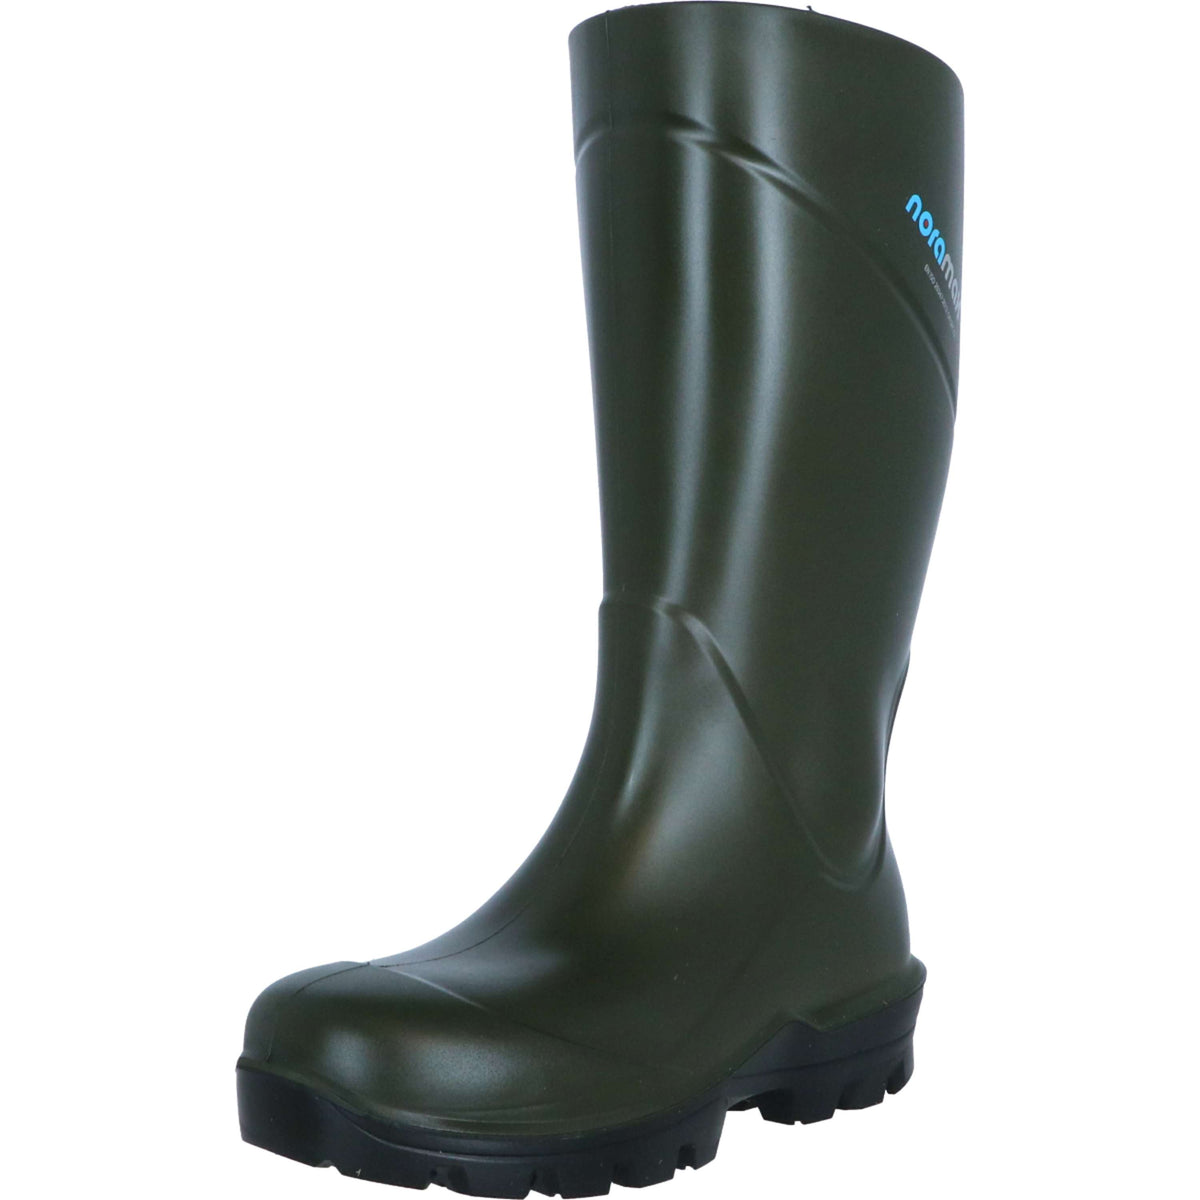 Kerbl Stiefel Noramax Non Safety